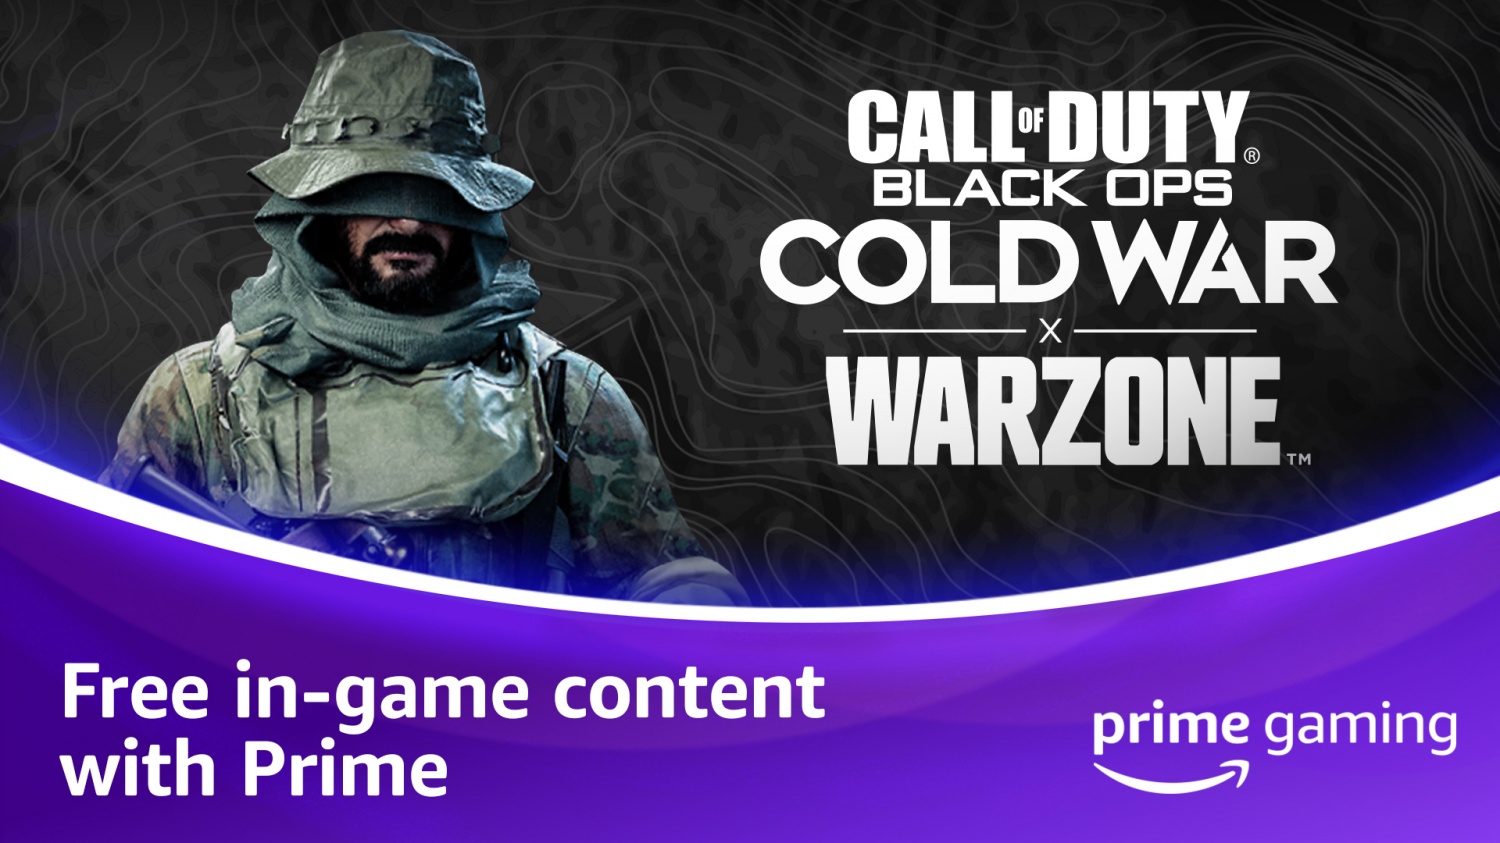 CALL OF DUTY-AMAZON PRIME GAMING